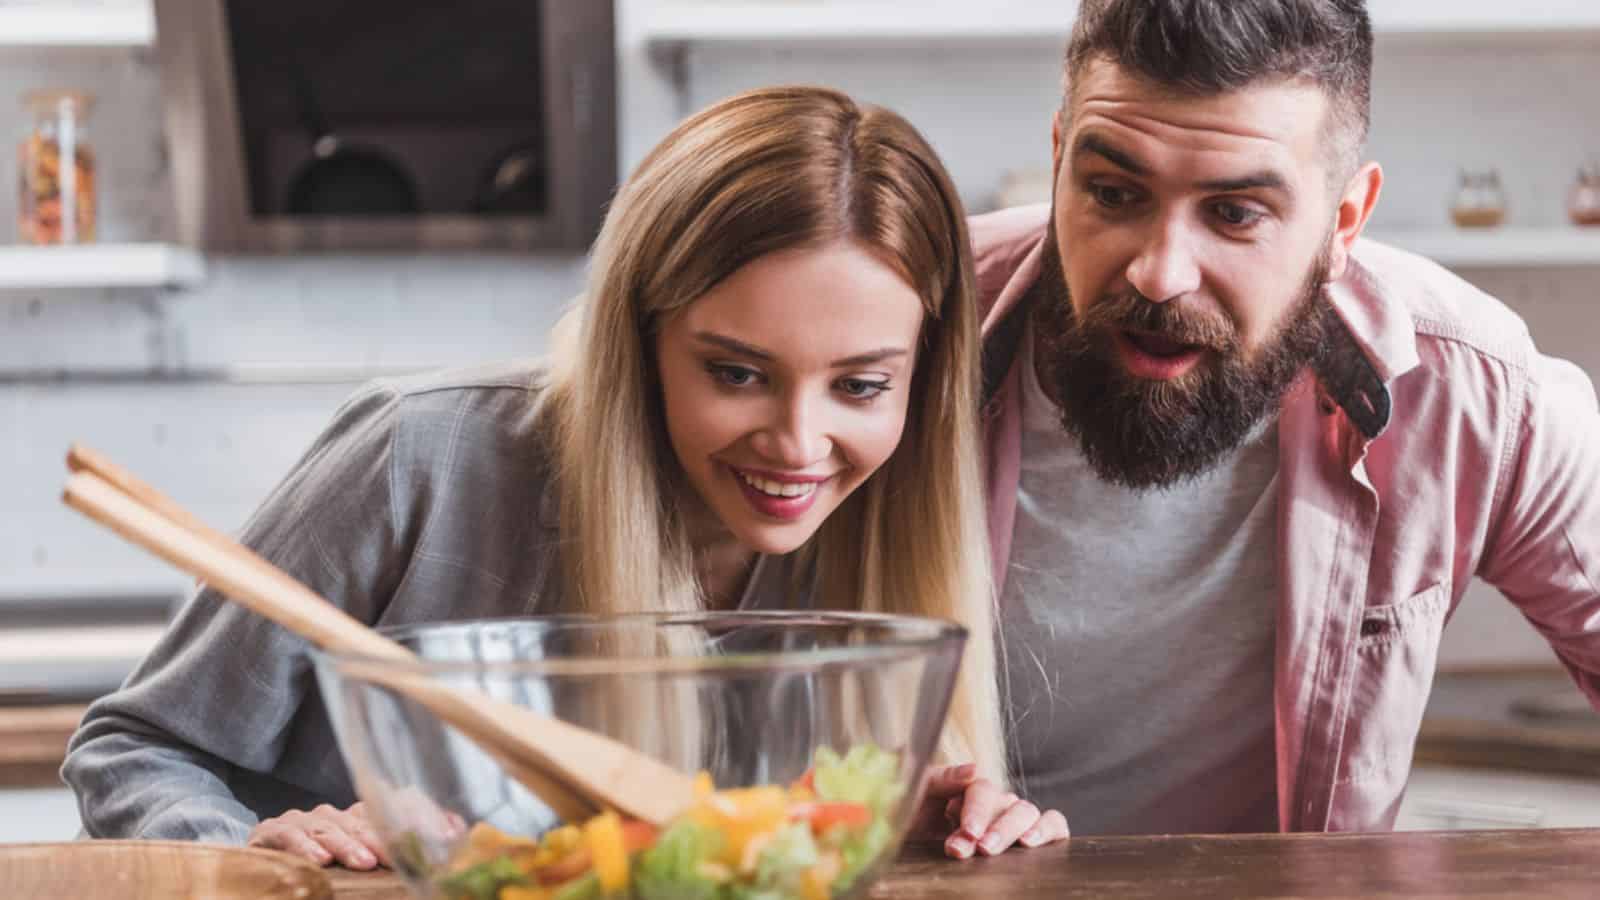 Surprised cheerful couple looking at salad in glass bowl